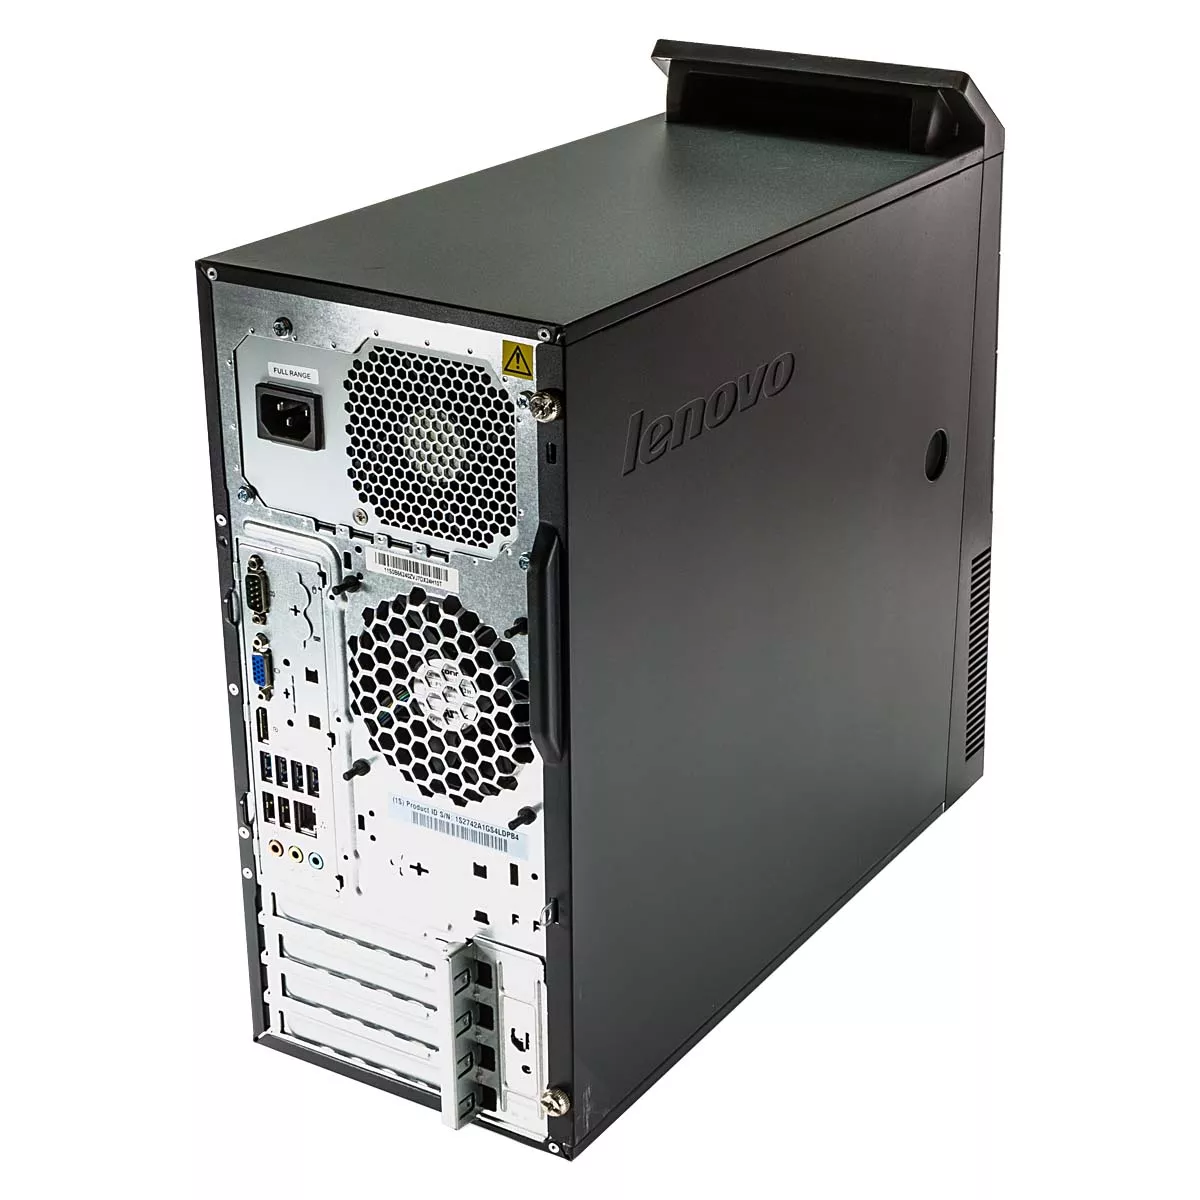 Lenovo Thinkcentre M83 Tower Core i3 4130 3,4 GHz